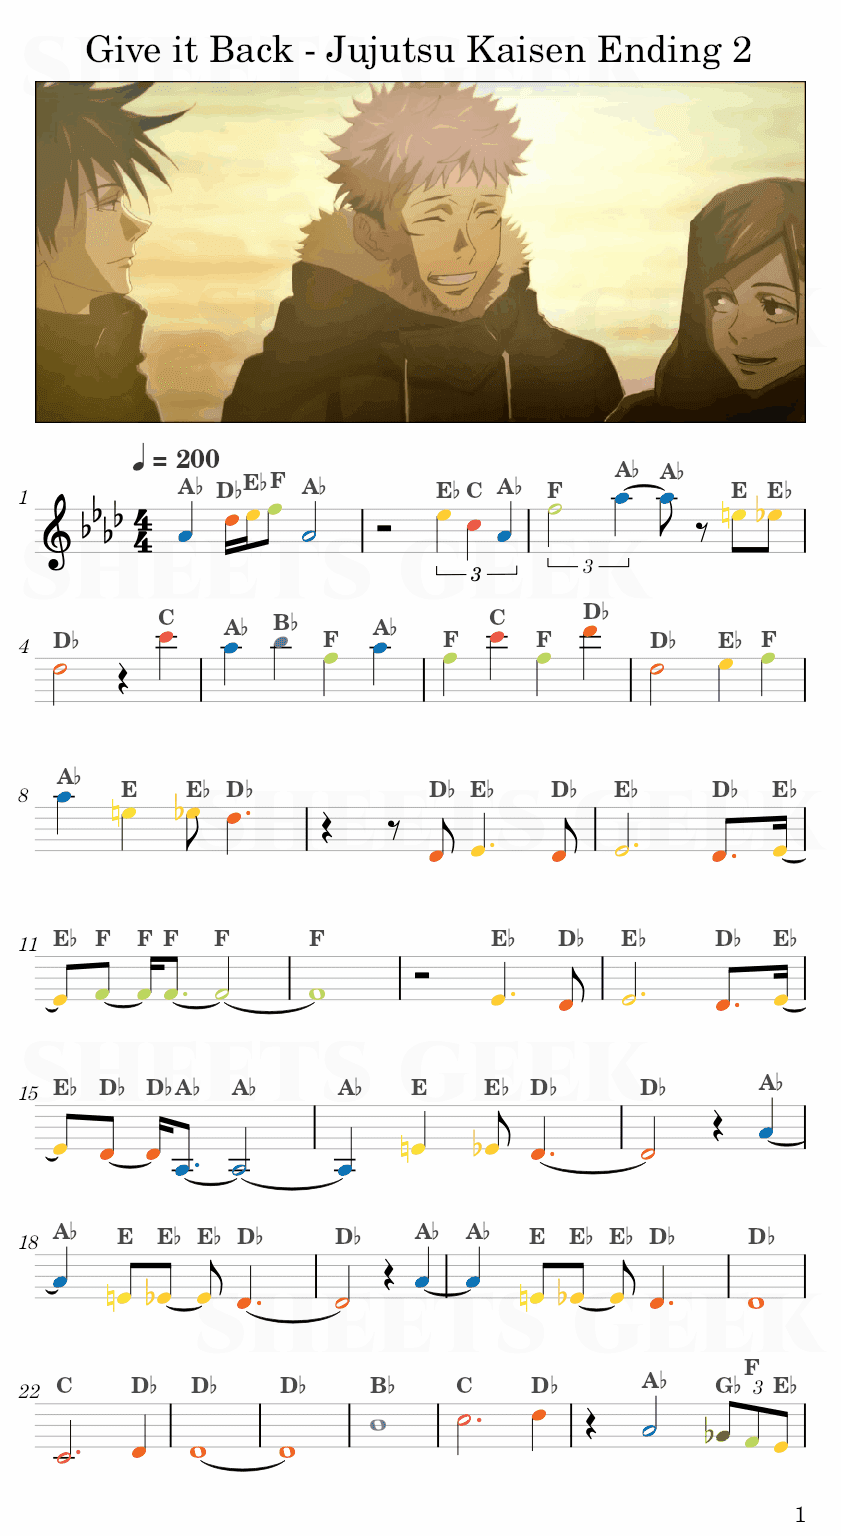 Give it Back - Jujutsu Kaisen Ending 2 Easy Sheet Music Free for piano, keyboard, flute, violin, sax, cello page 1